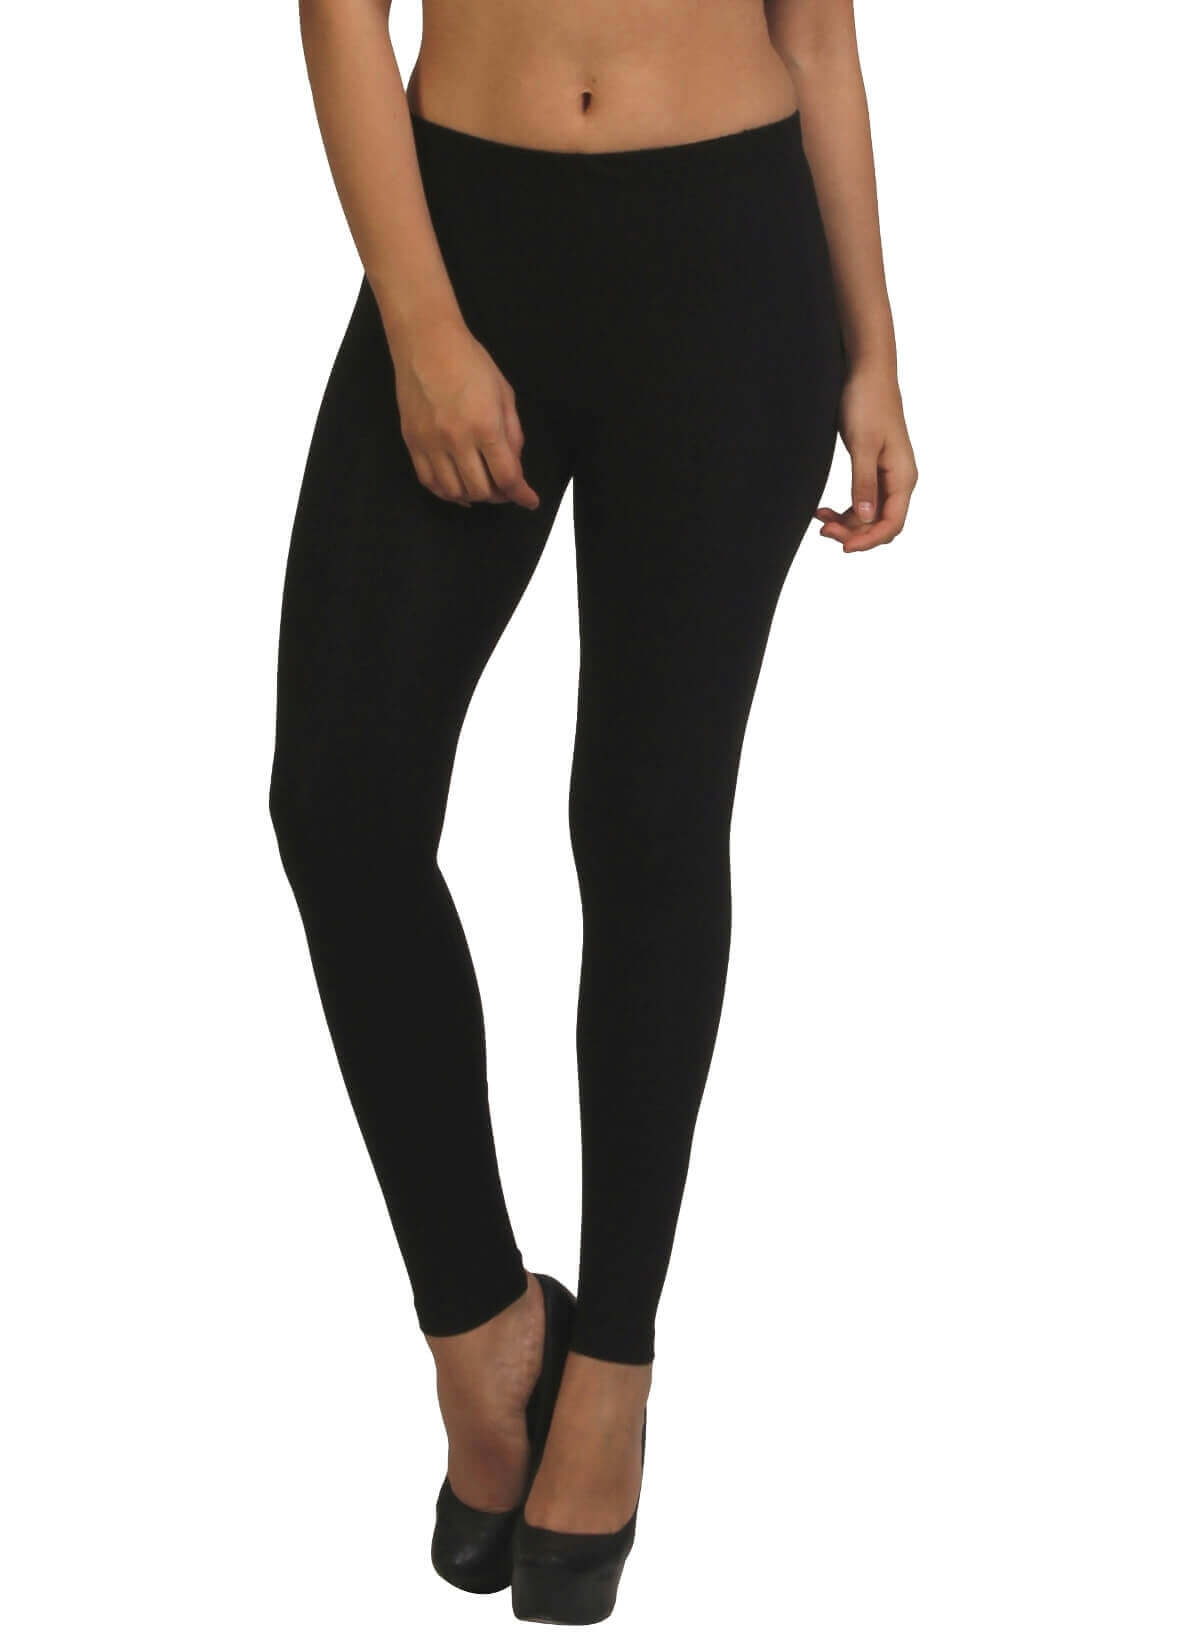 https://frenchtrendz.com/images/thumbs/0002343_frenchtrendz-cotton-spandex-fleece-black-warmer-ankle-leggings.jpeg